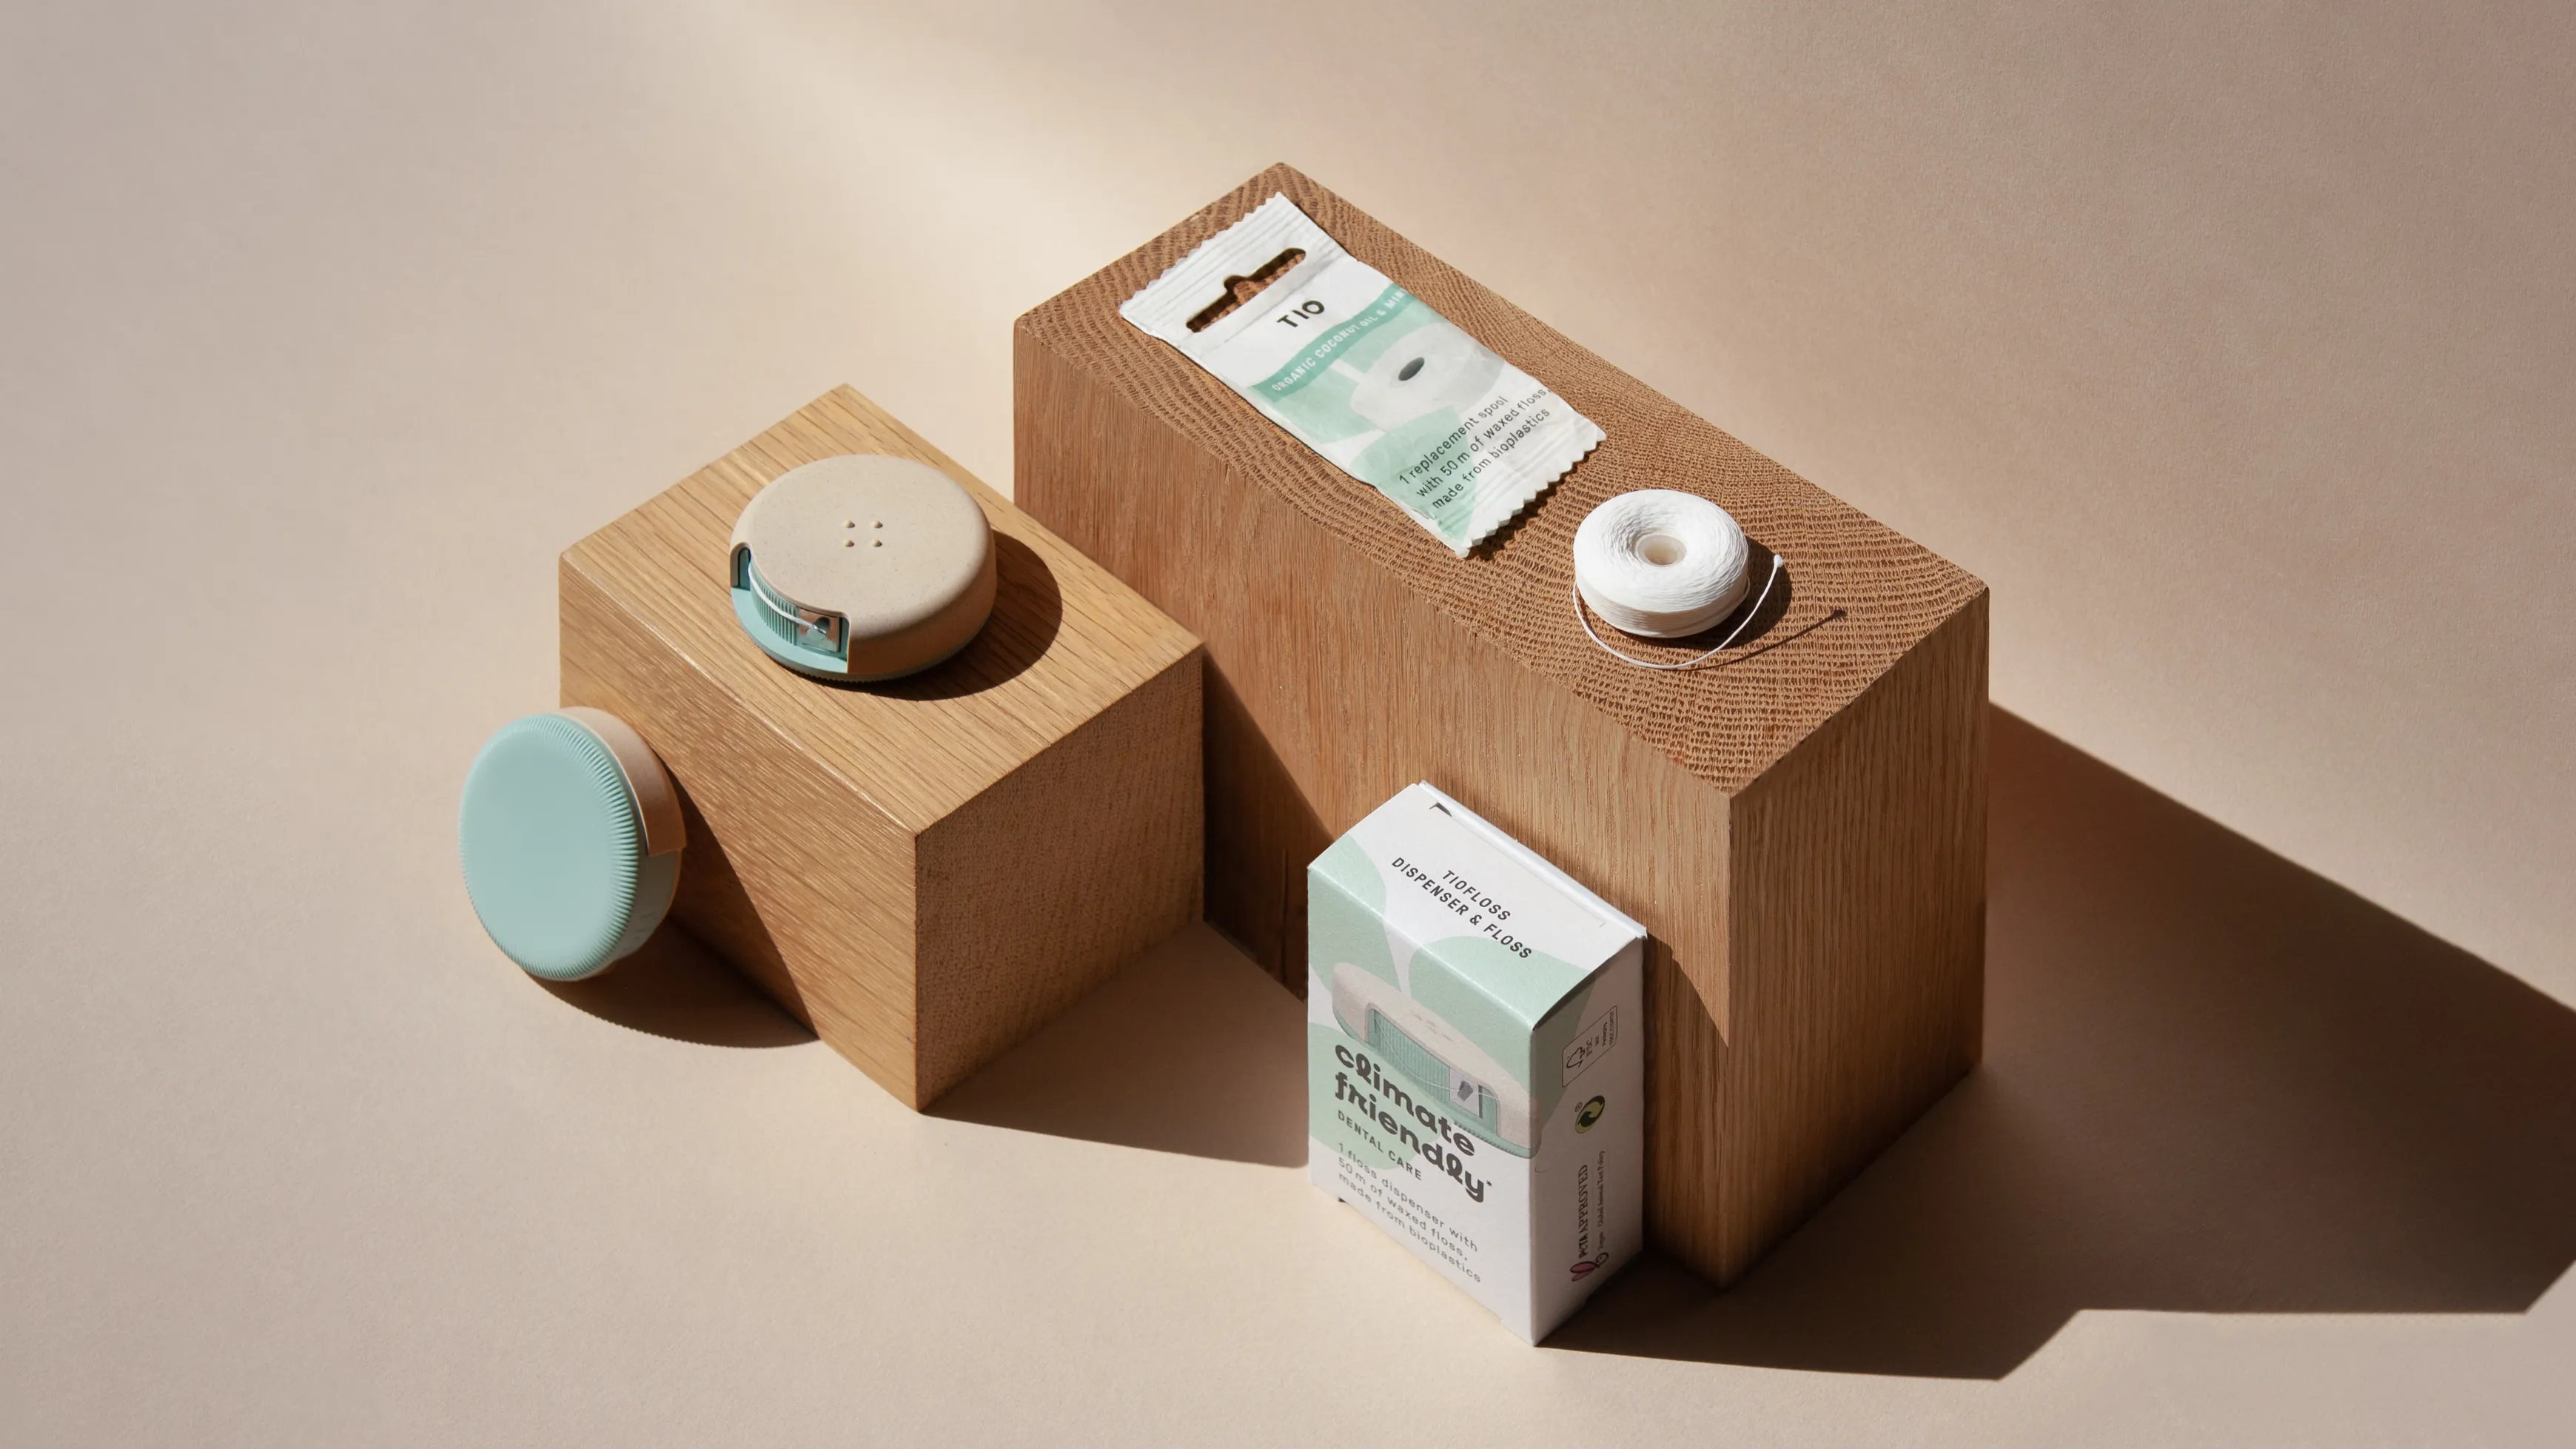 TIO floss products and packaging on display on wooden blocks